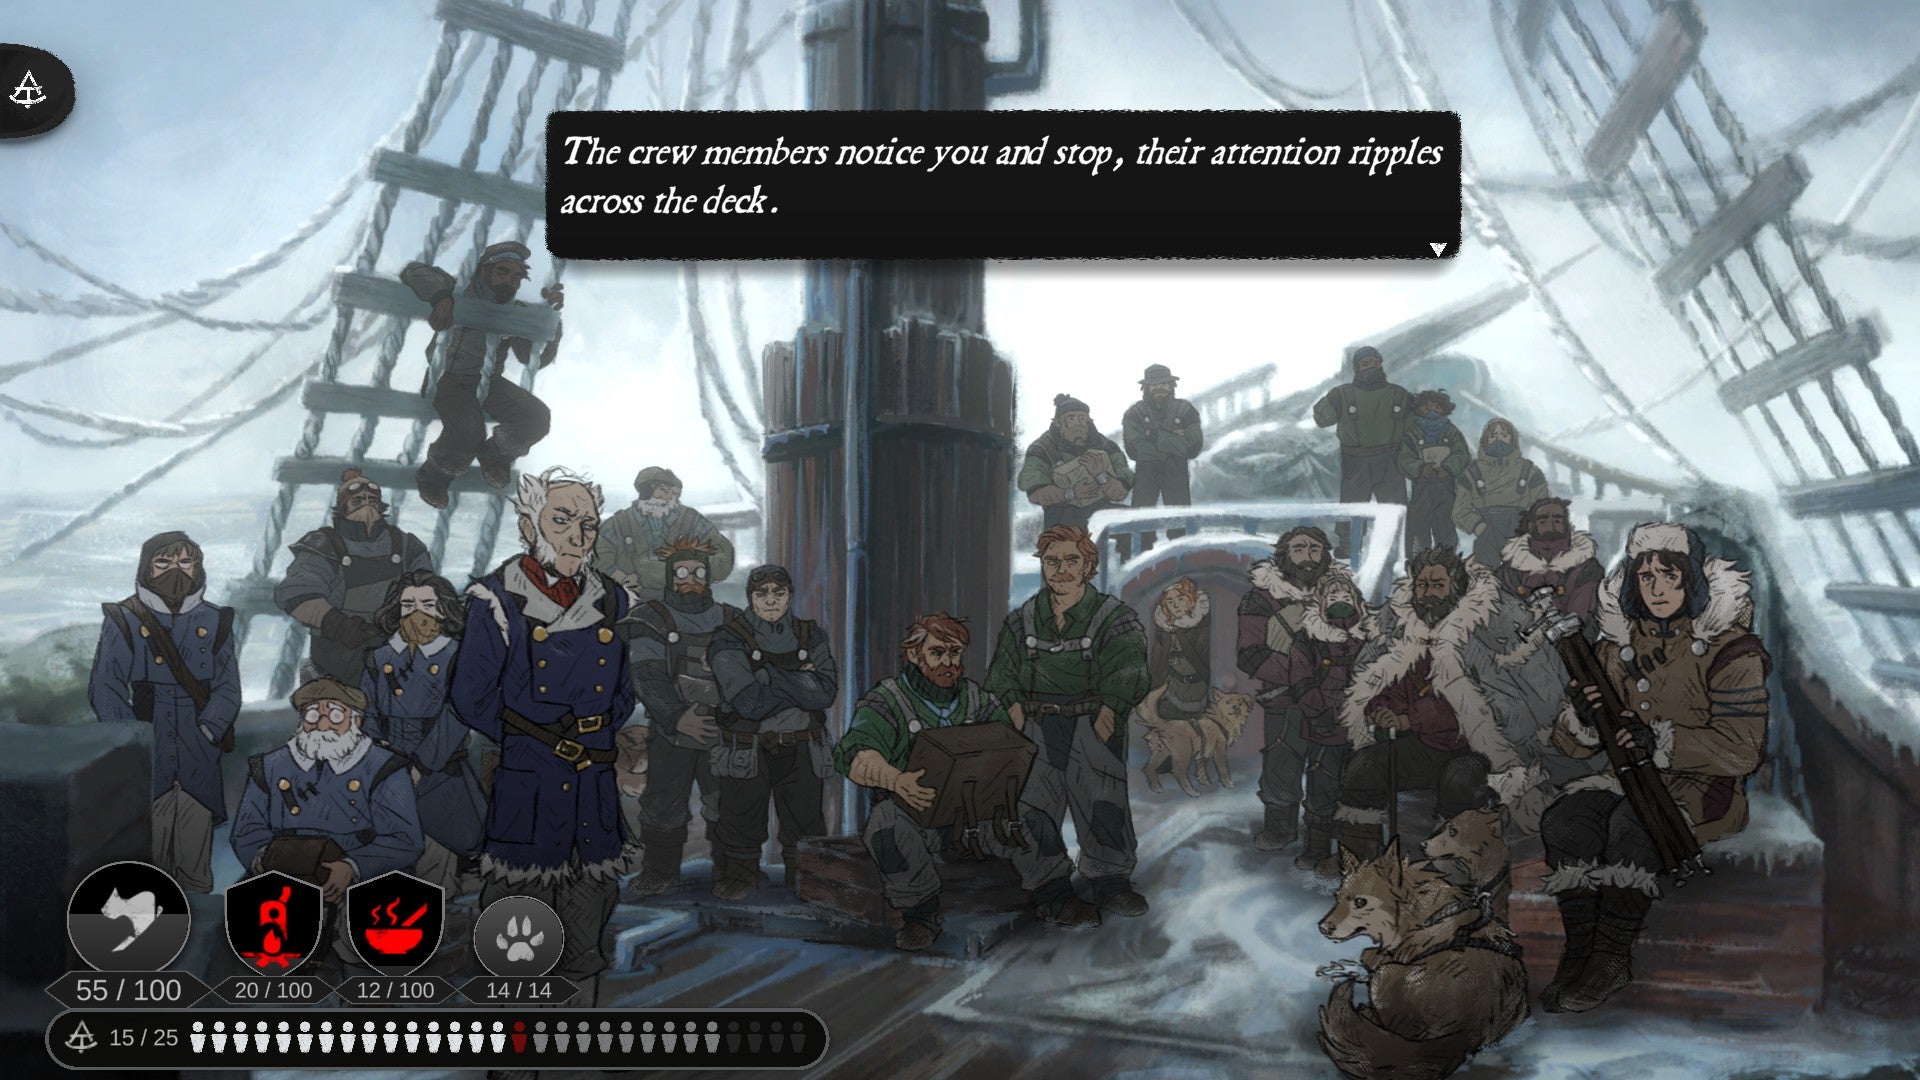 The crew gathers on the deck of a steam ship in The Pale Beyond